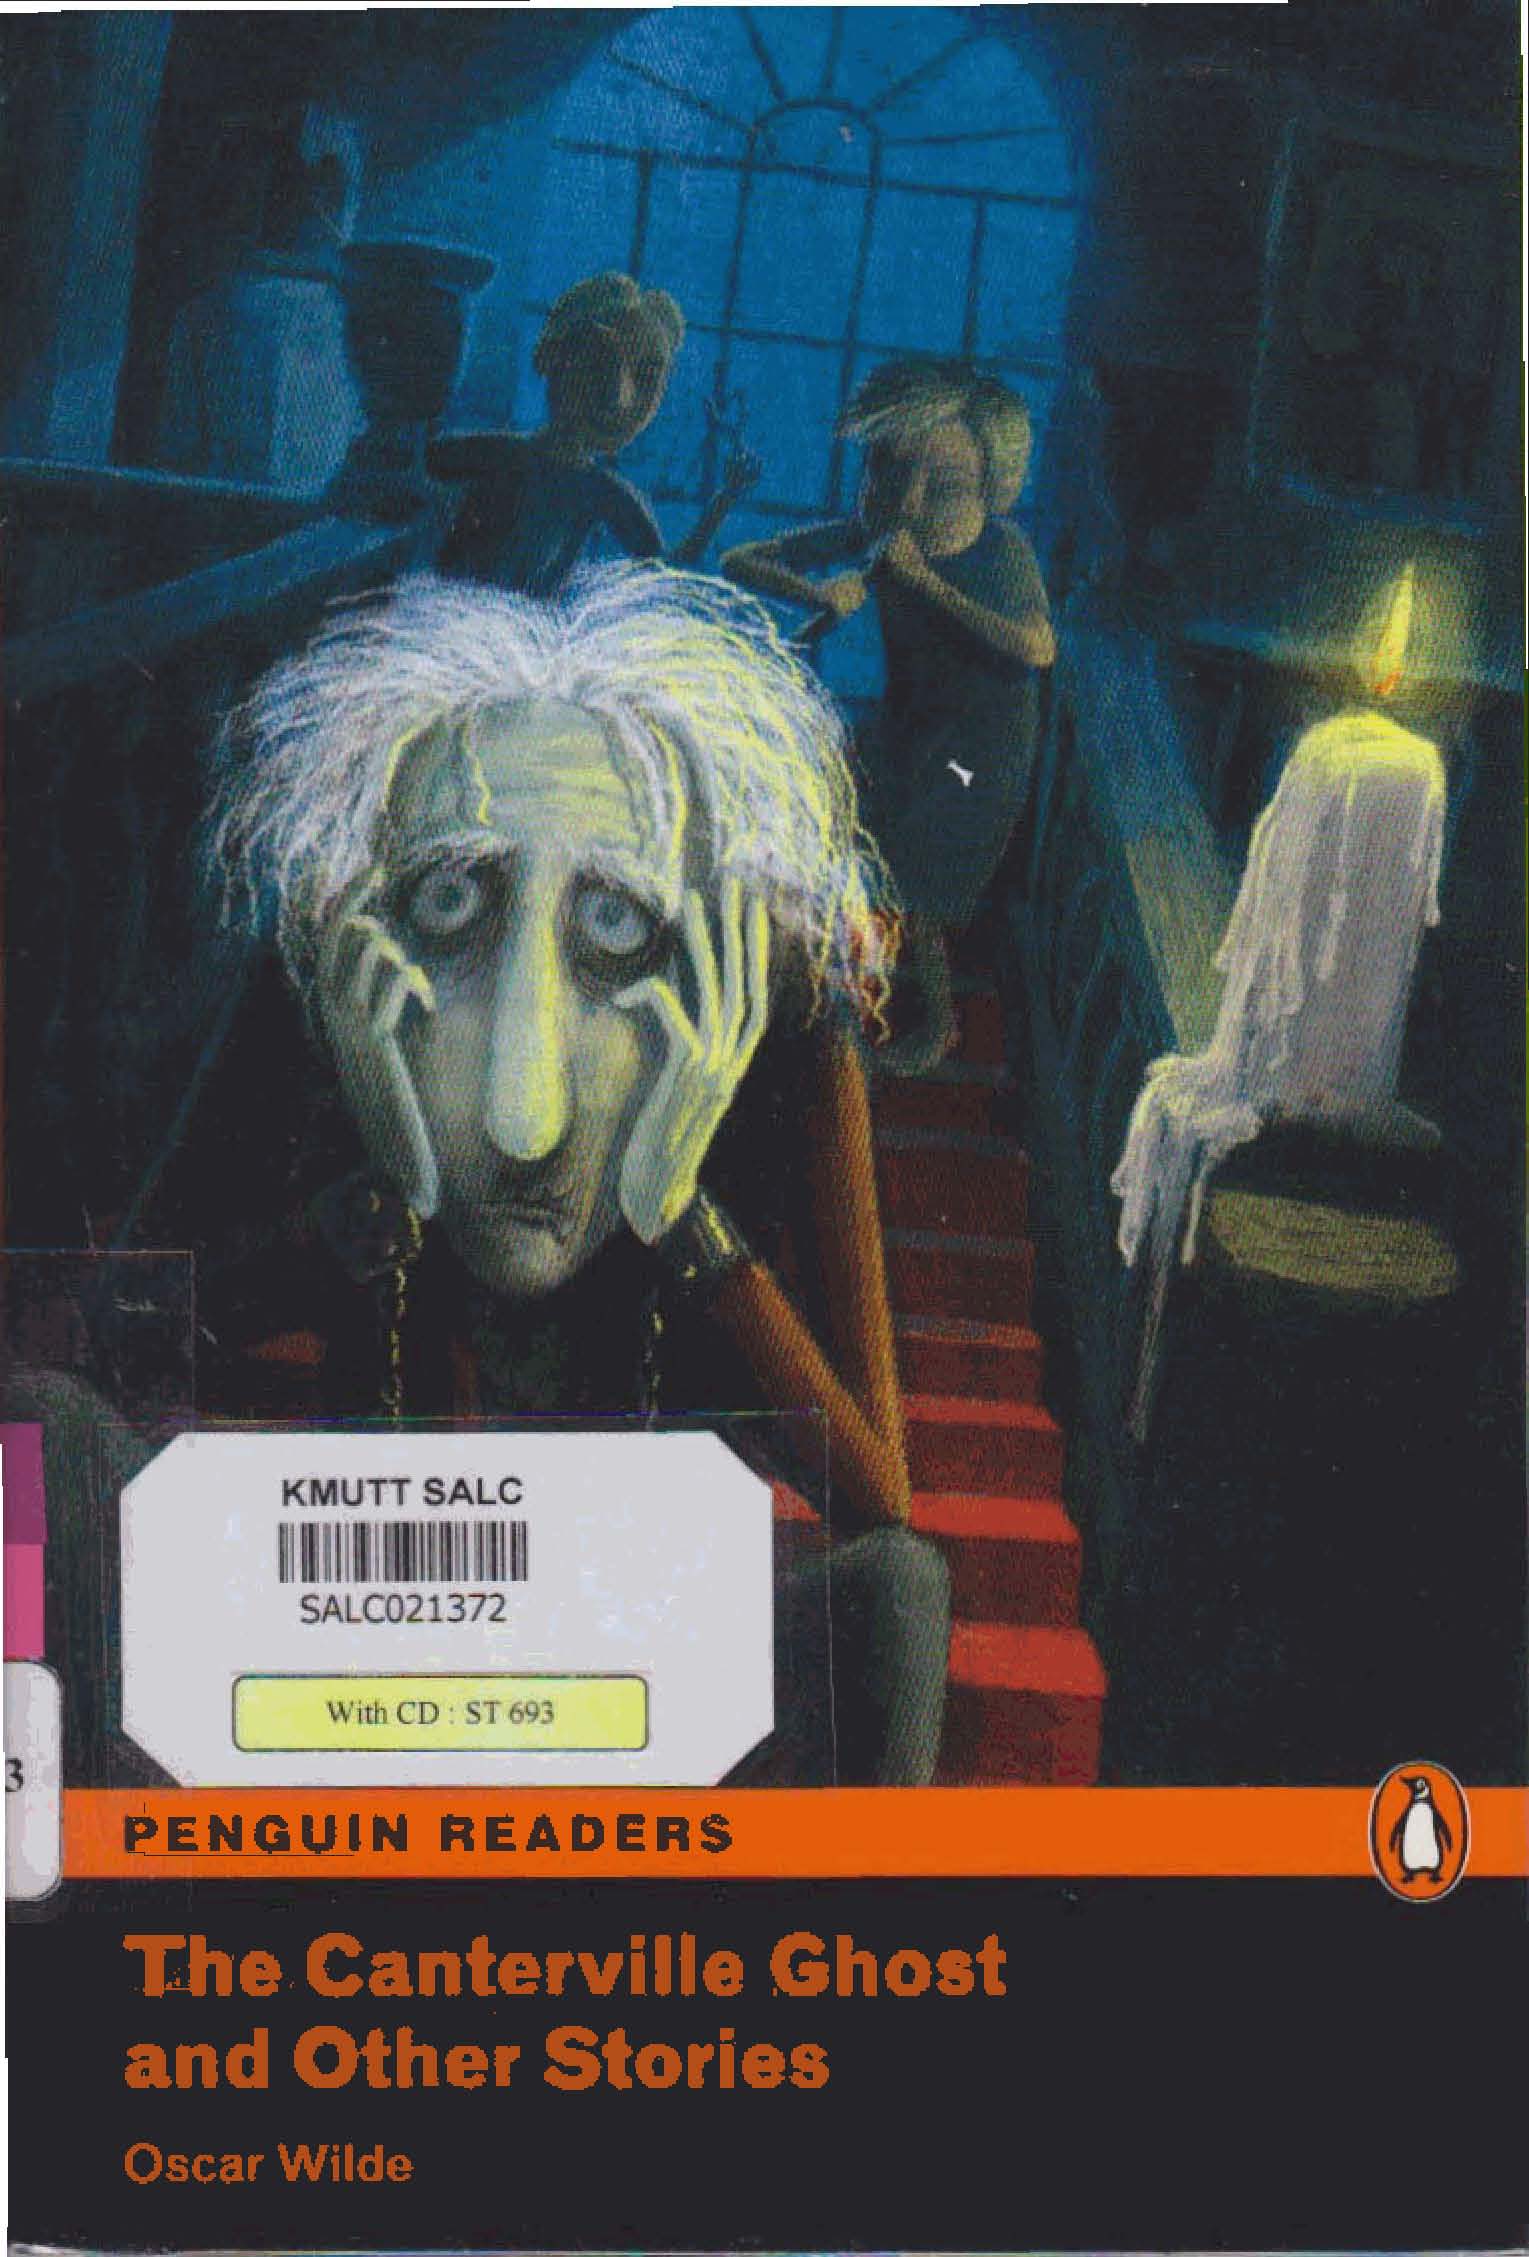 The Canterville Ghost and Other Stories: Penguin Readers Level 4 (Edition 2010)